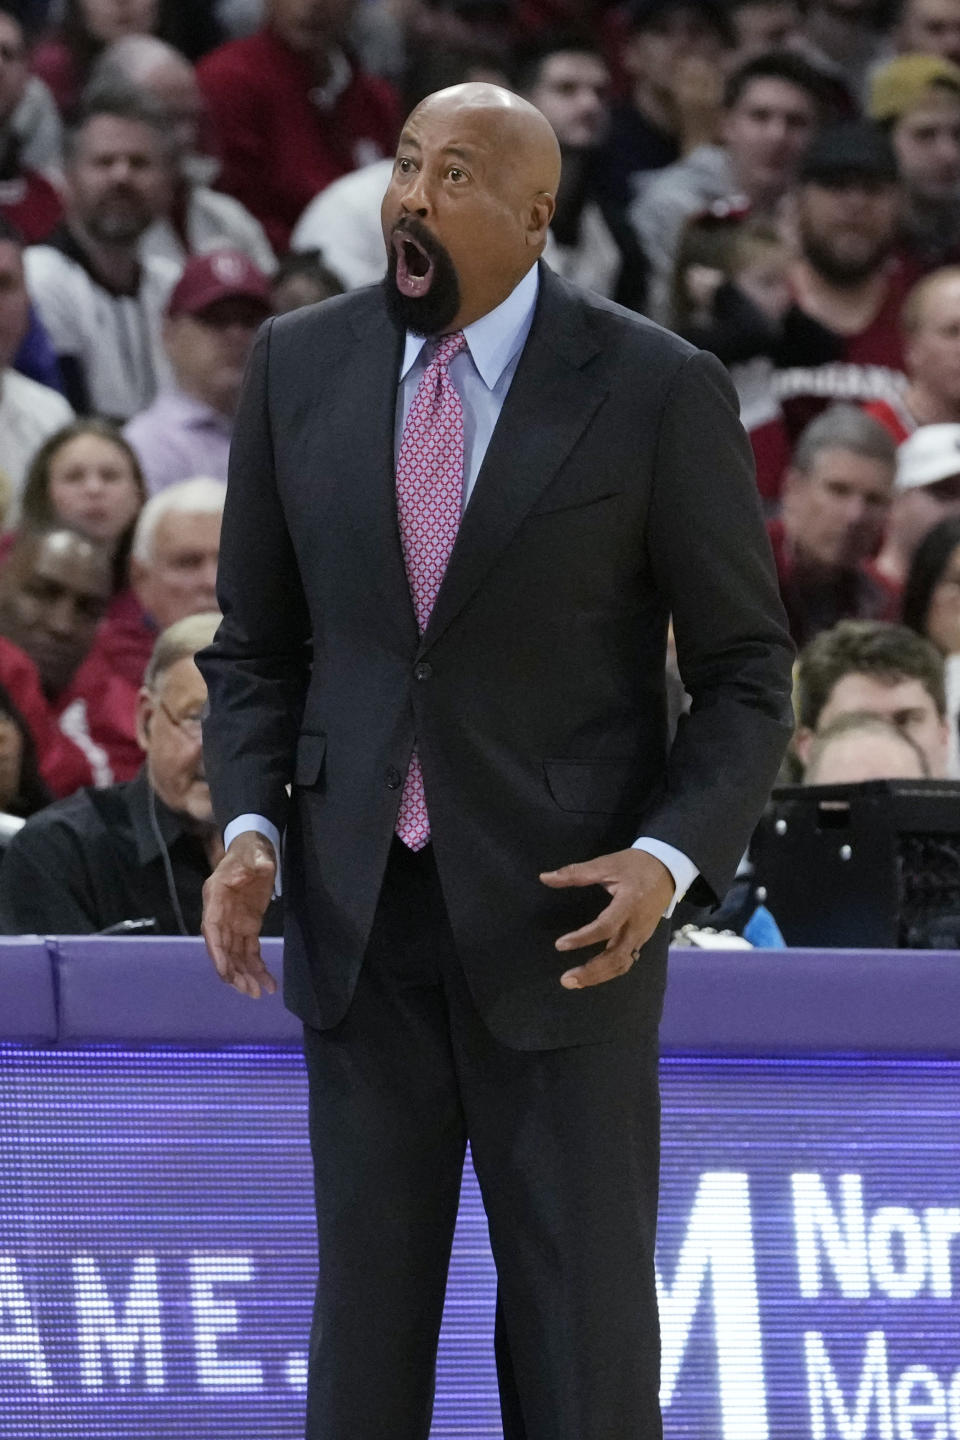 Indiana coach Mike Woodson reacts to a call during the first half of the team's NCAA college basketball game against Northwestern in Evanston, Ill., Wednesday, Feb. 15, 2023. (AP Photo/Nam Y. Huh)